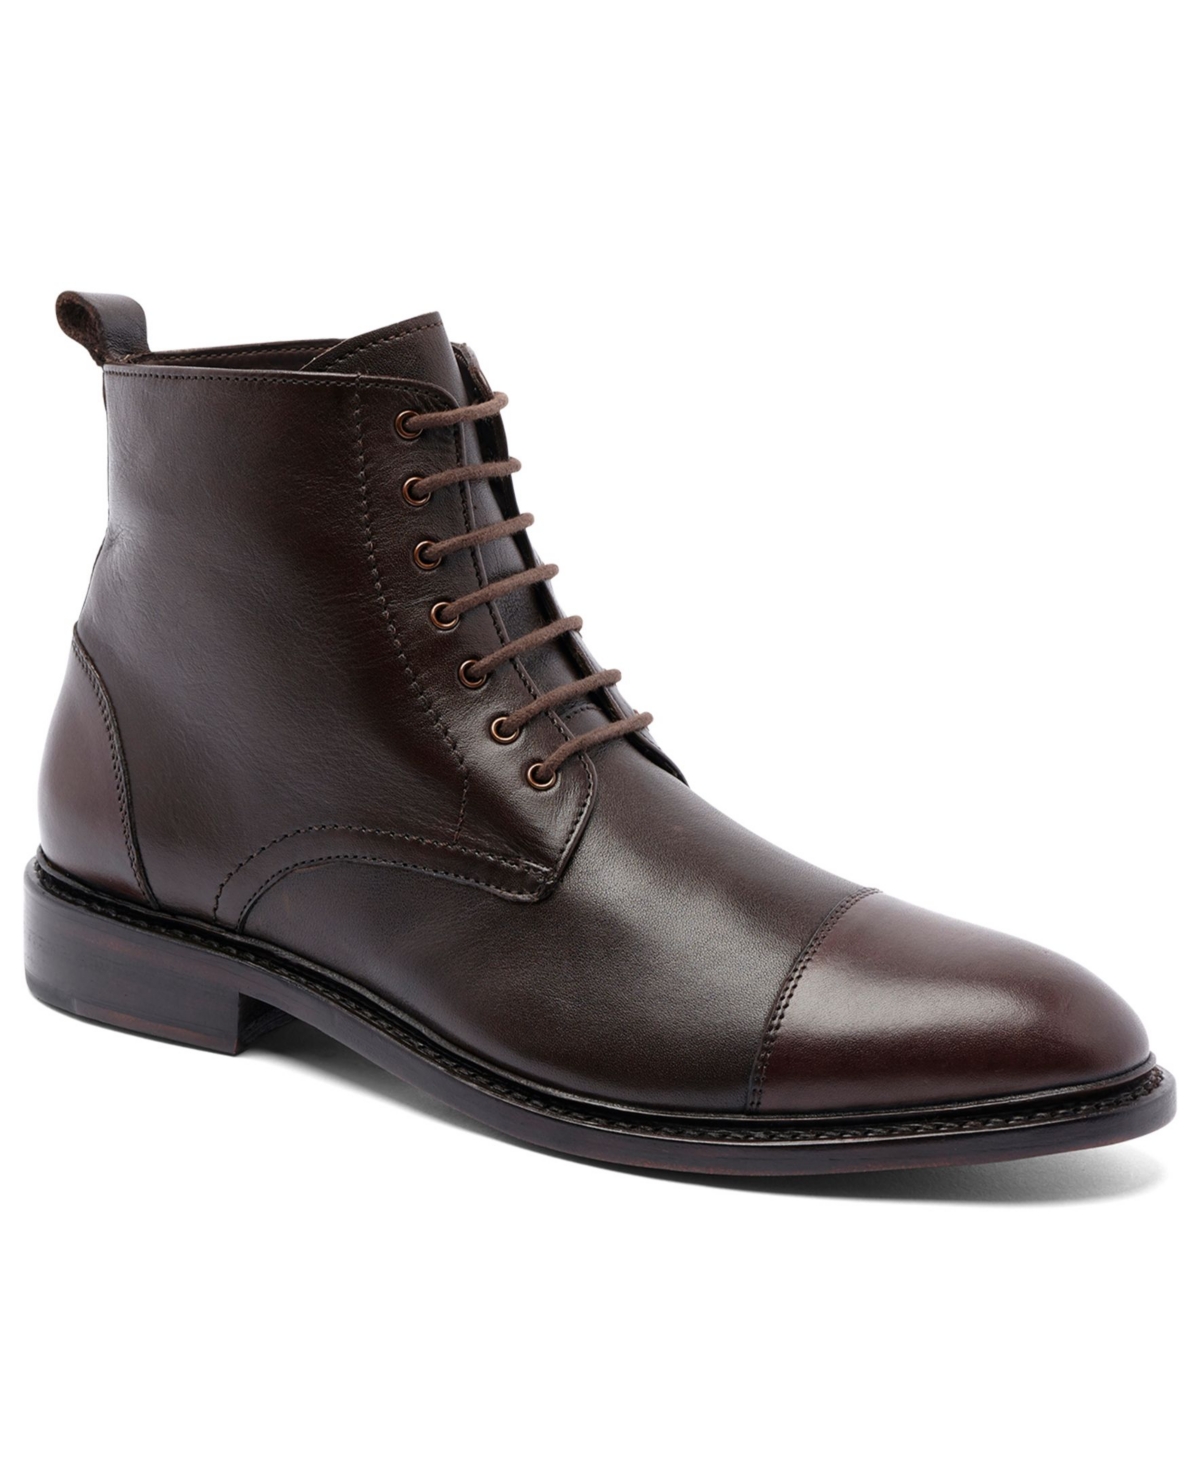 Men's Monroe Lace-Up Goodyear Casual Leather Dress Boots - Brown